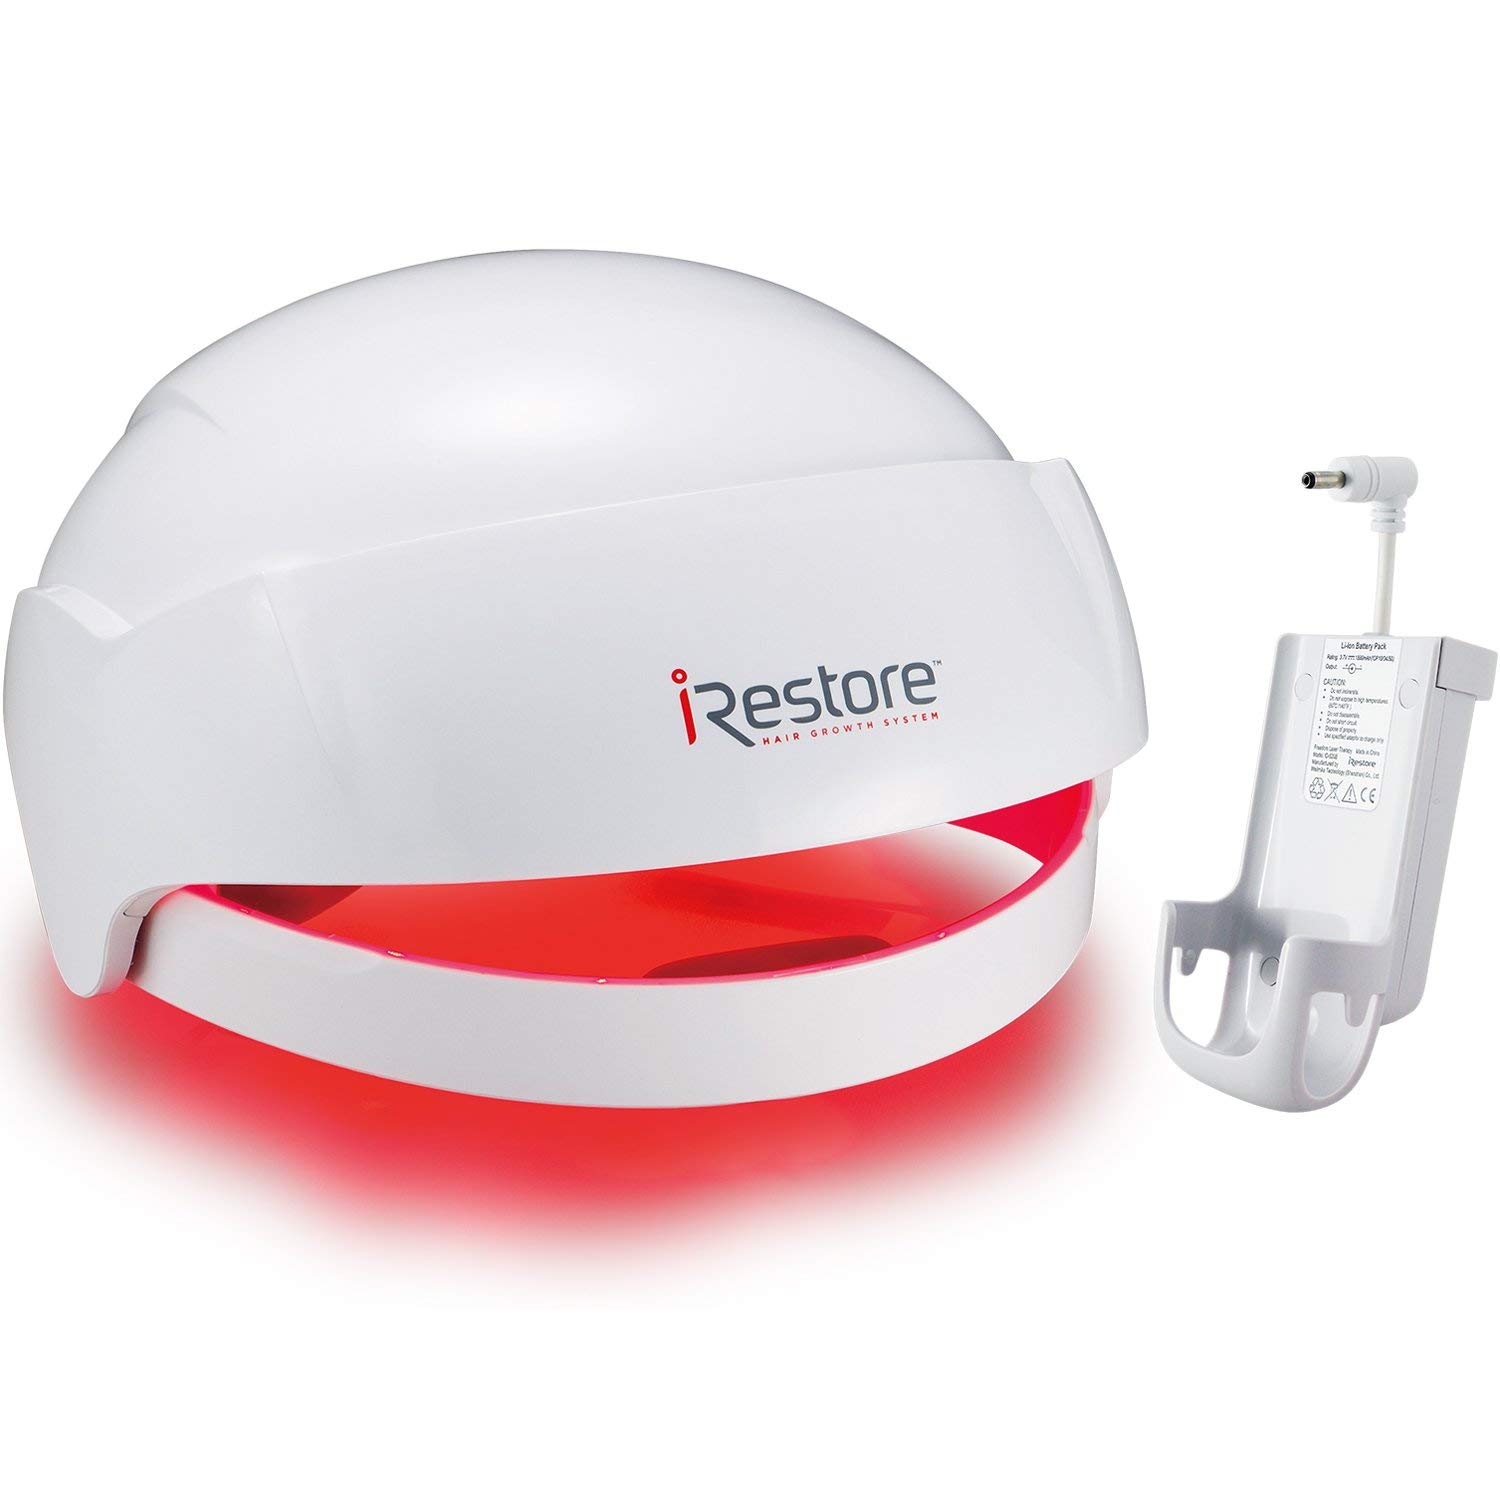 Review of iRestore Laser Hair Growth System